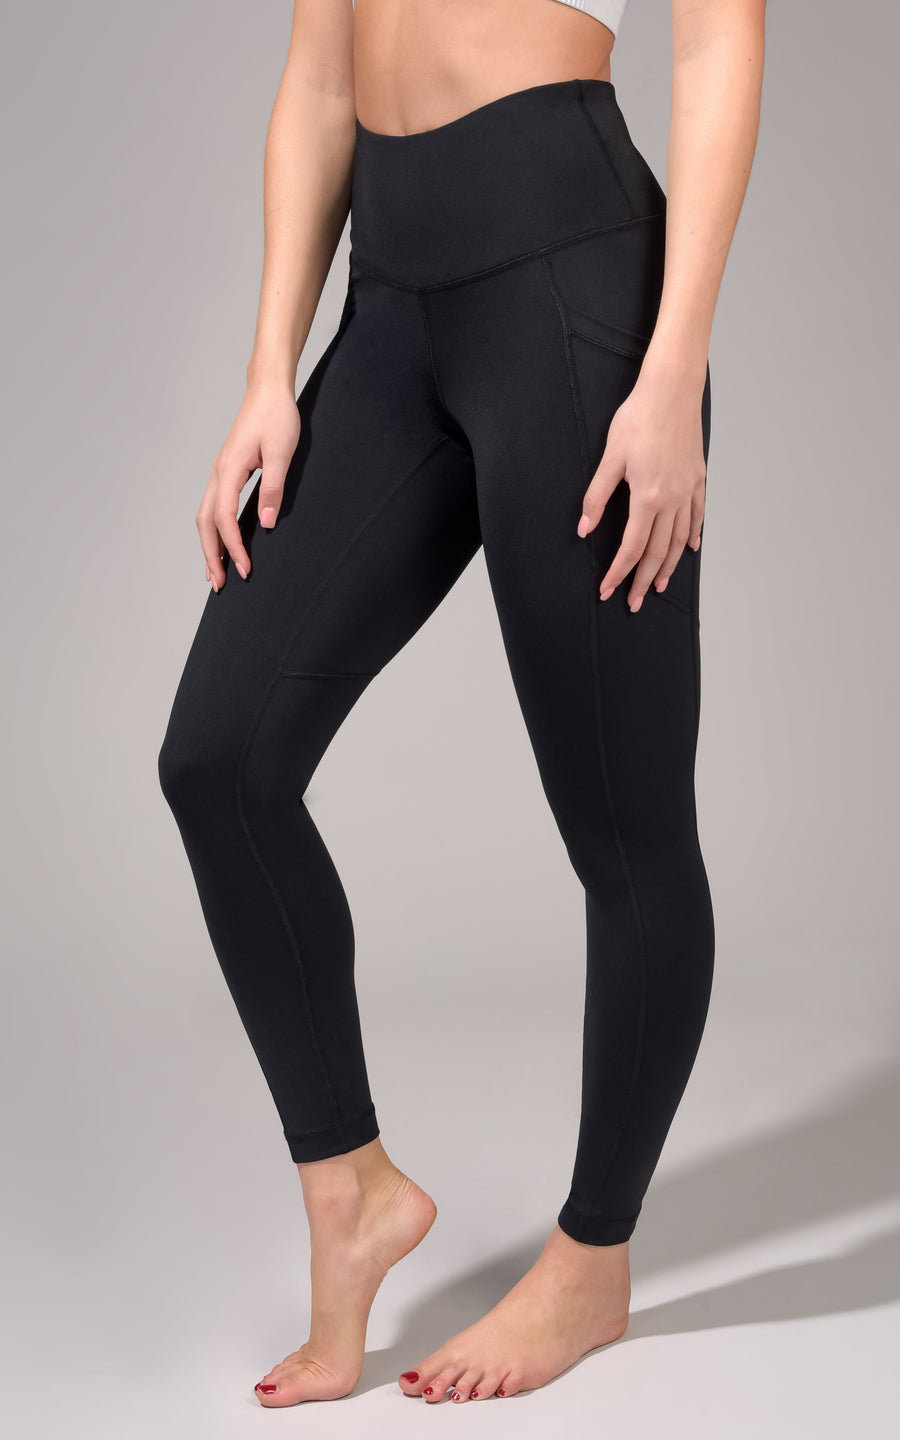 90 Degrees by Reflex Leggings Gray - $10 (60% Off Retail) - From Haley